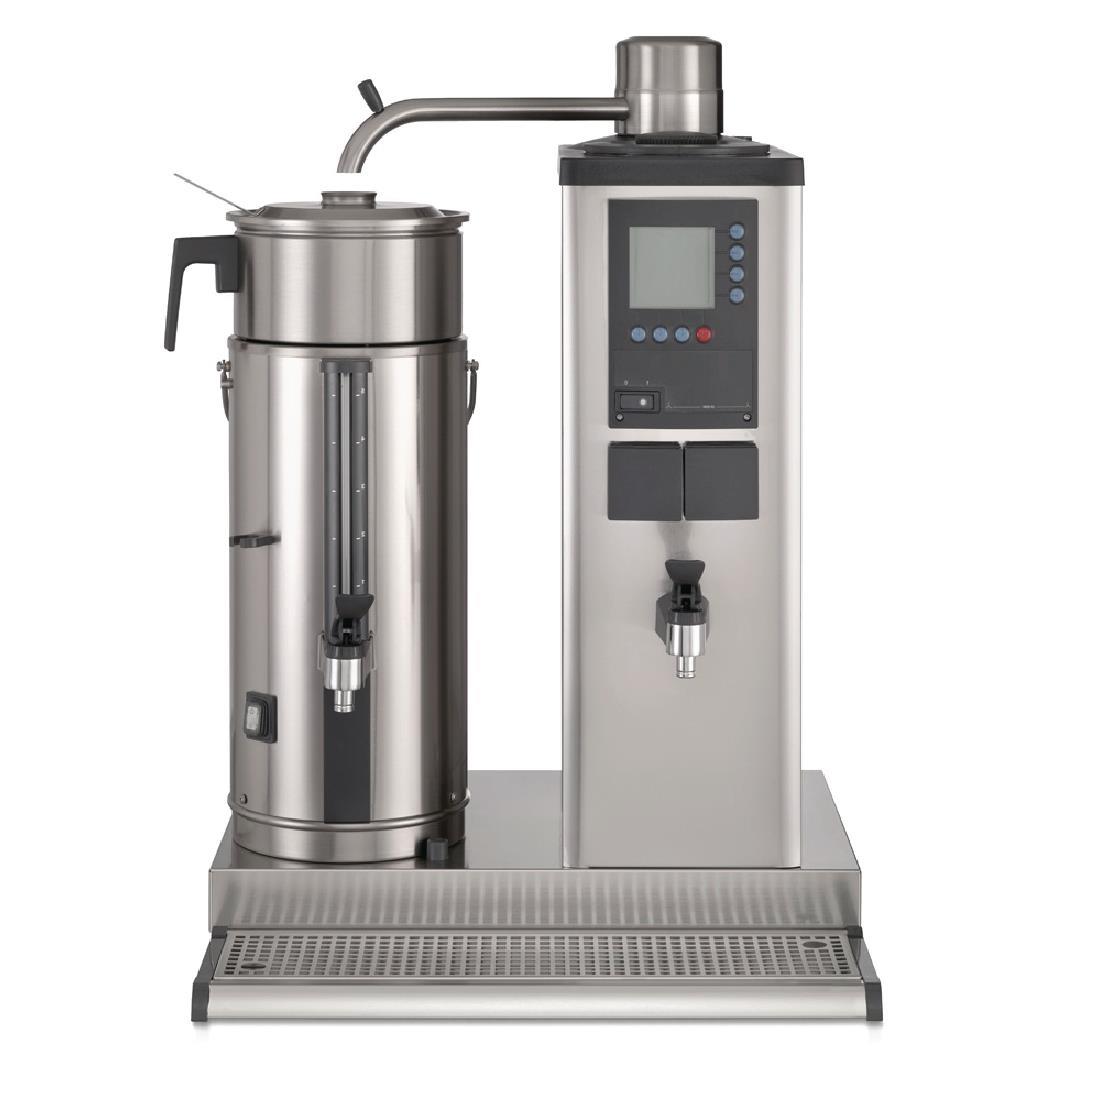 Bravilor B20 HWL Bulk Coffee Brewer with 20Ltr Coffee Urn and Hot Water Tap 3 Phase - DC691  - 2